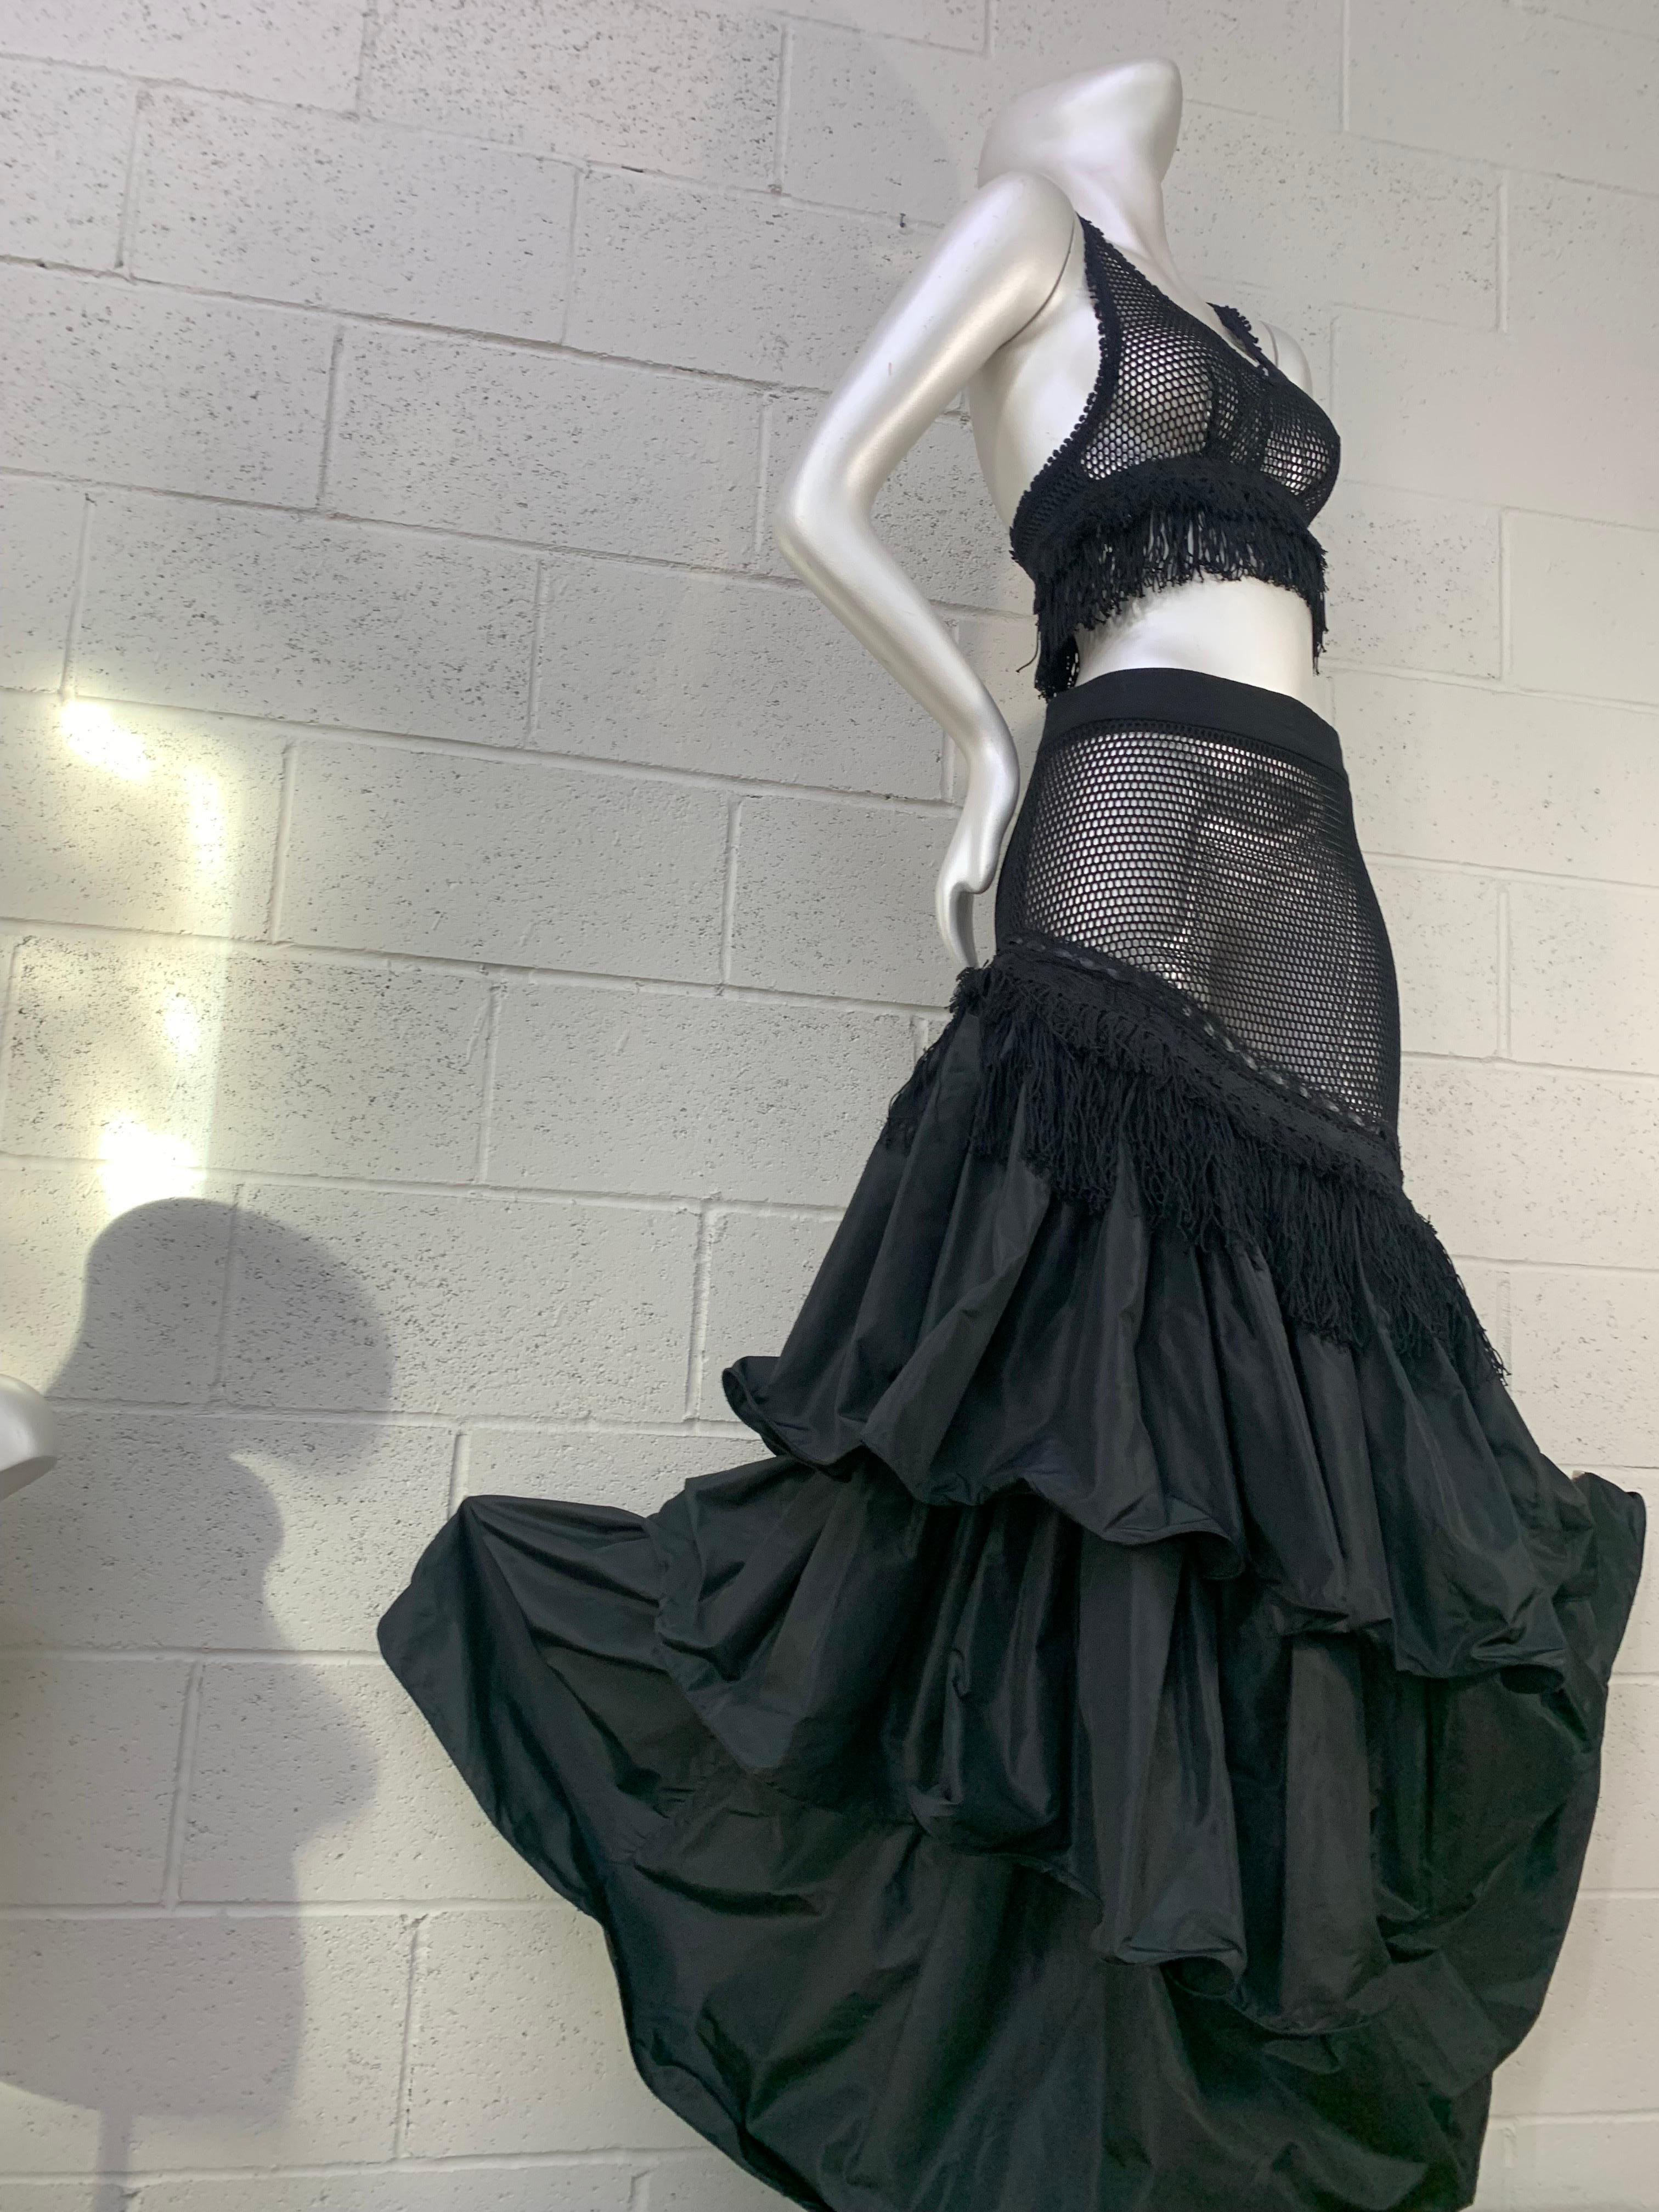 Torso Creations Black 2-Piece Fishnet & Silk Taffeta Tiered Flamenco Skirt & Top:  Burlesque-inspired black fishnet cropped top is trimmed in fringe with racer back styling. Skirt is a provacative mix of fishnet and lush tiered silk taffeta ruffles.